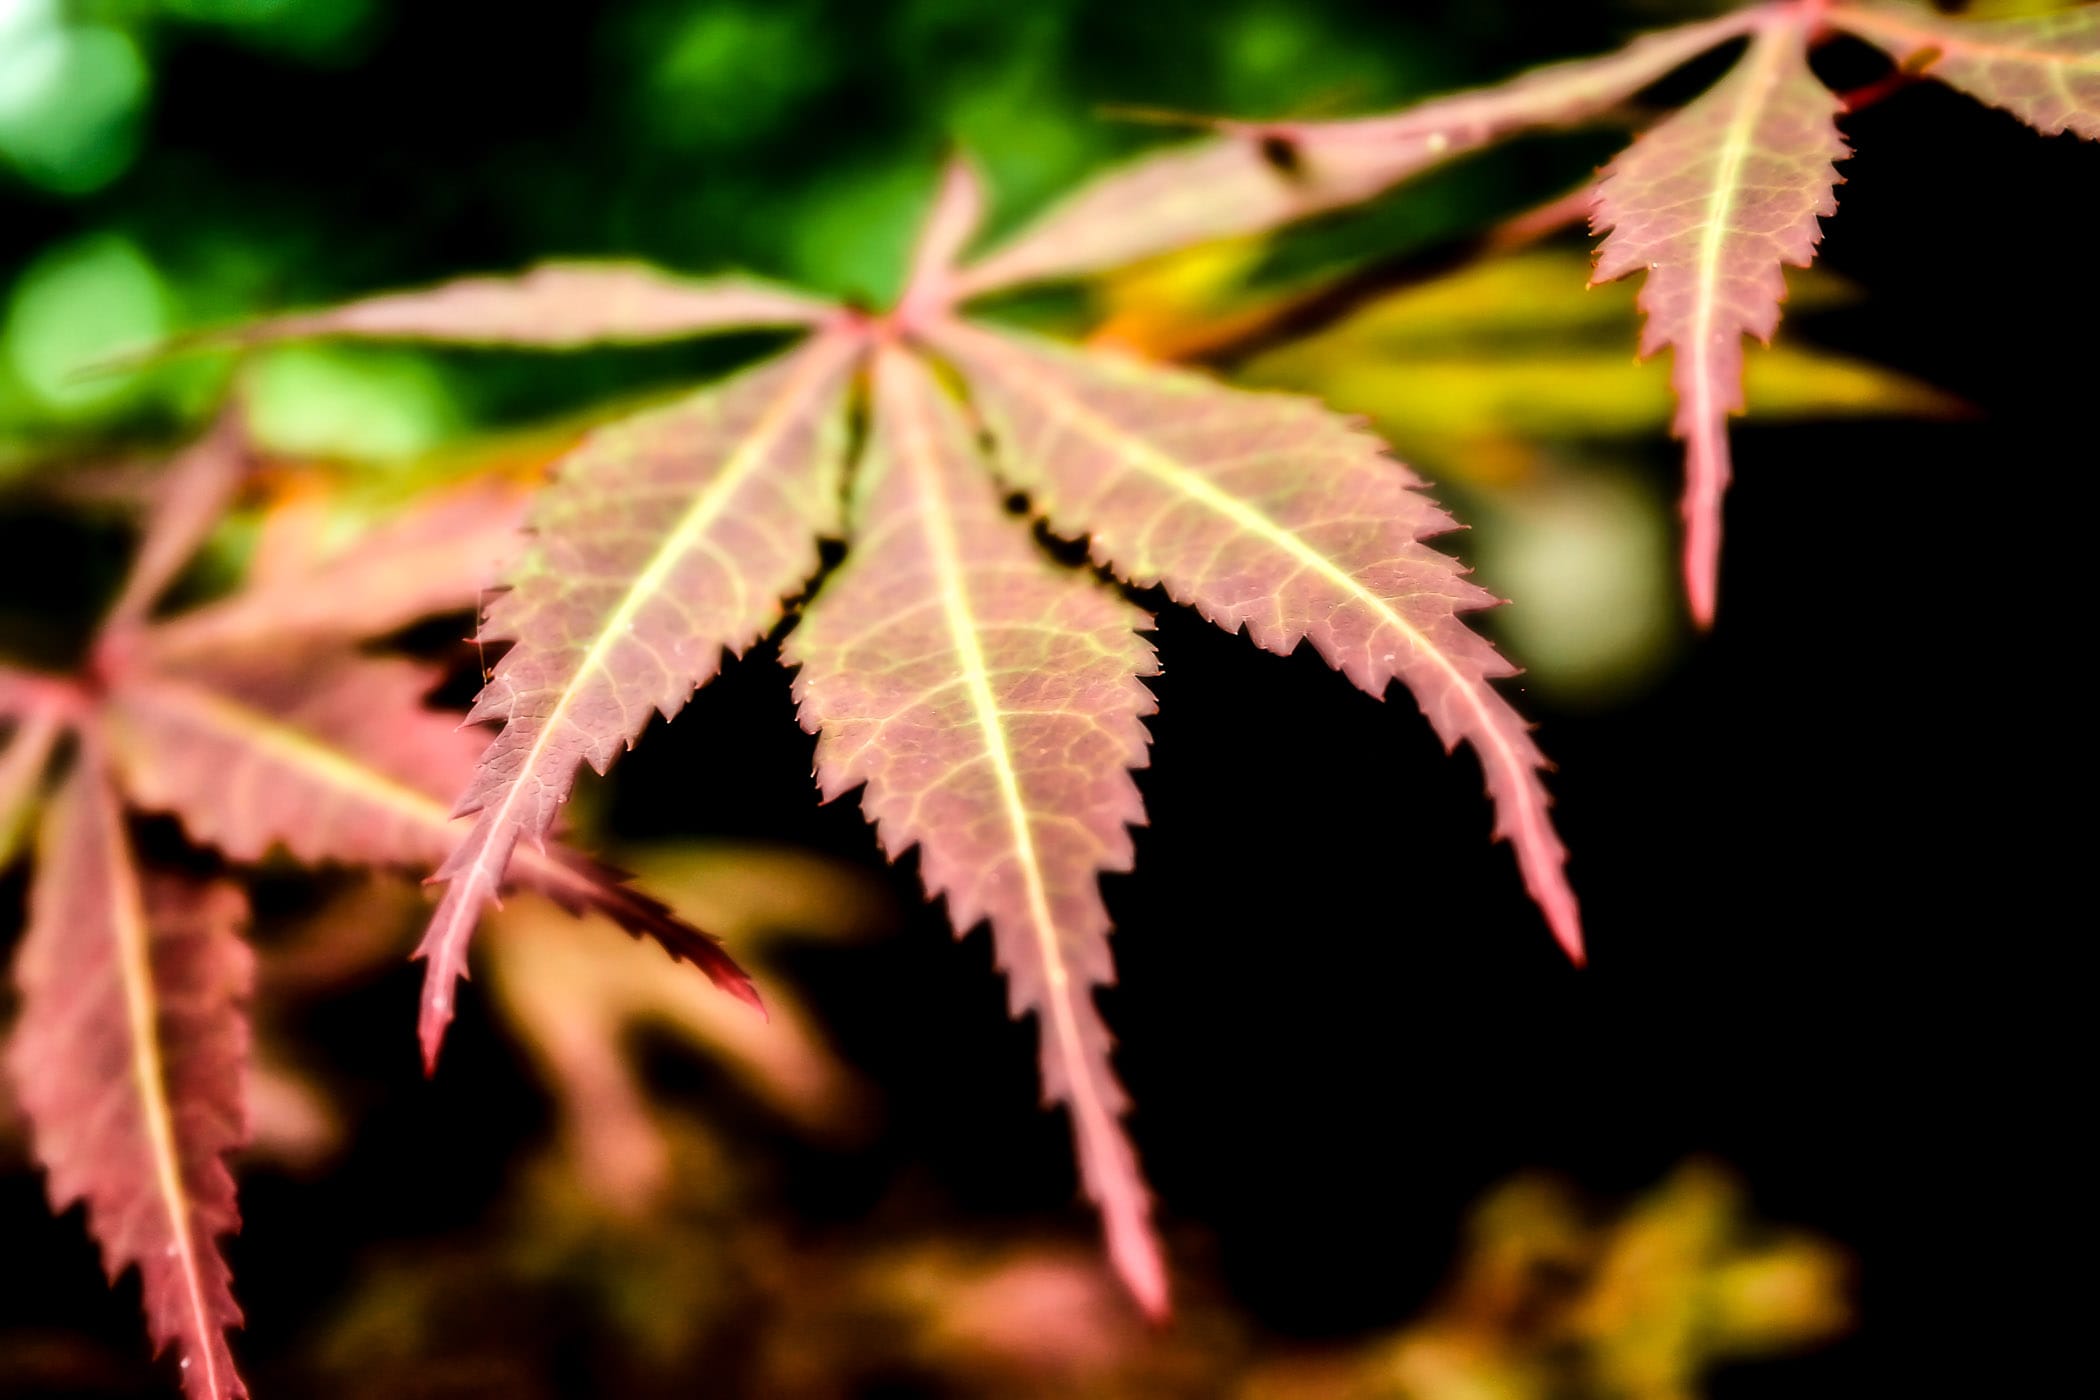 The leaves of a Japanese Maple tree at my mother's house in Tyler, Texas.